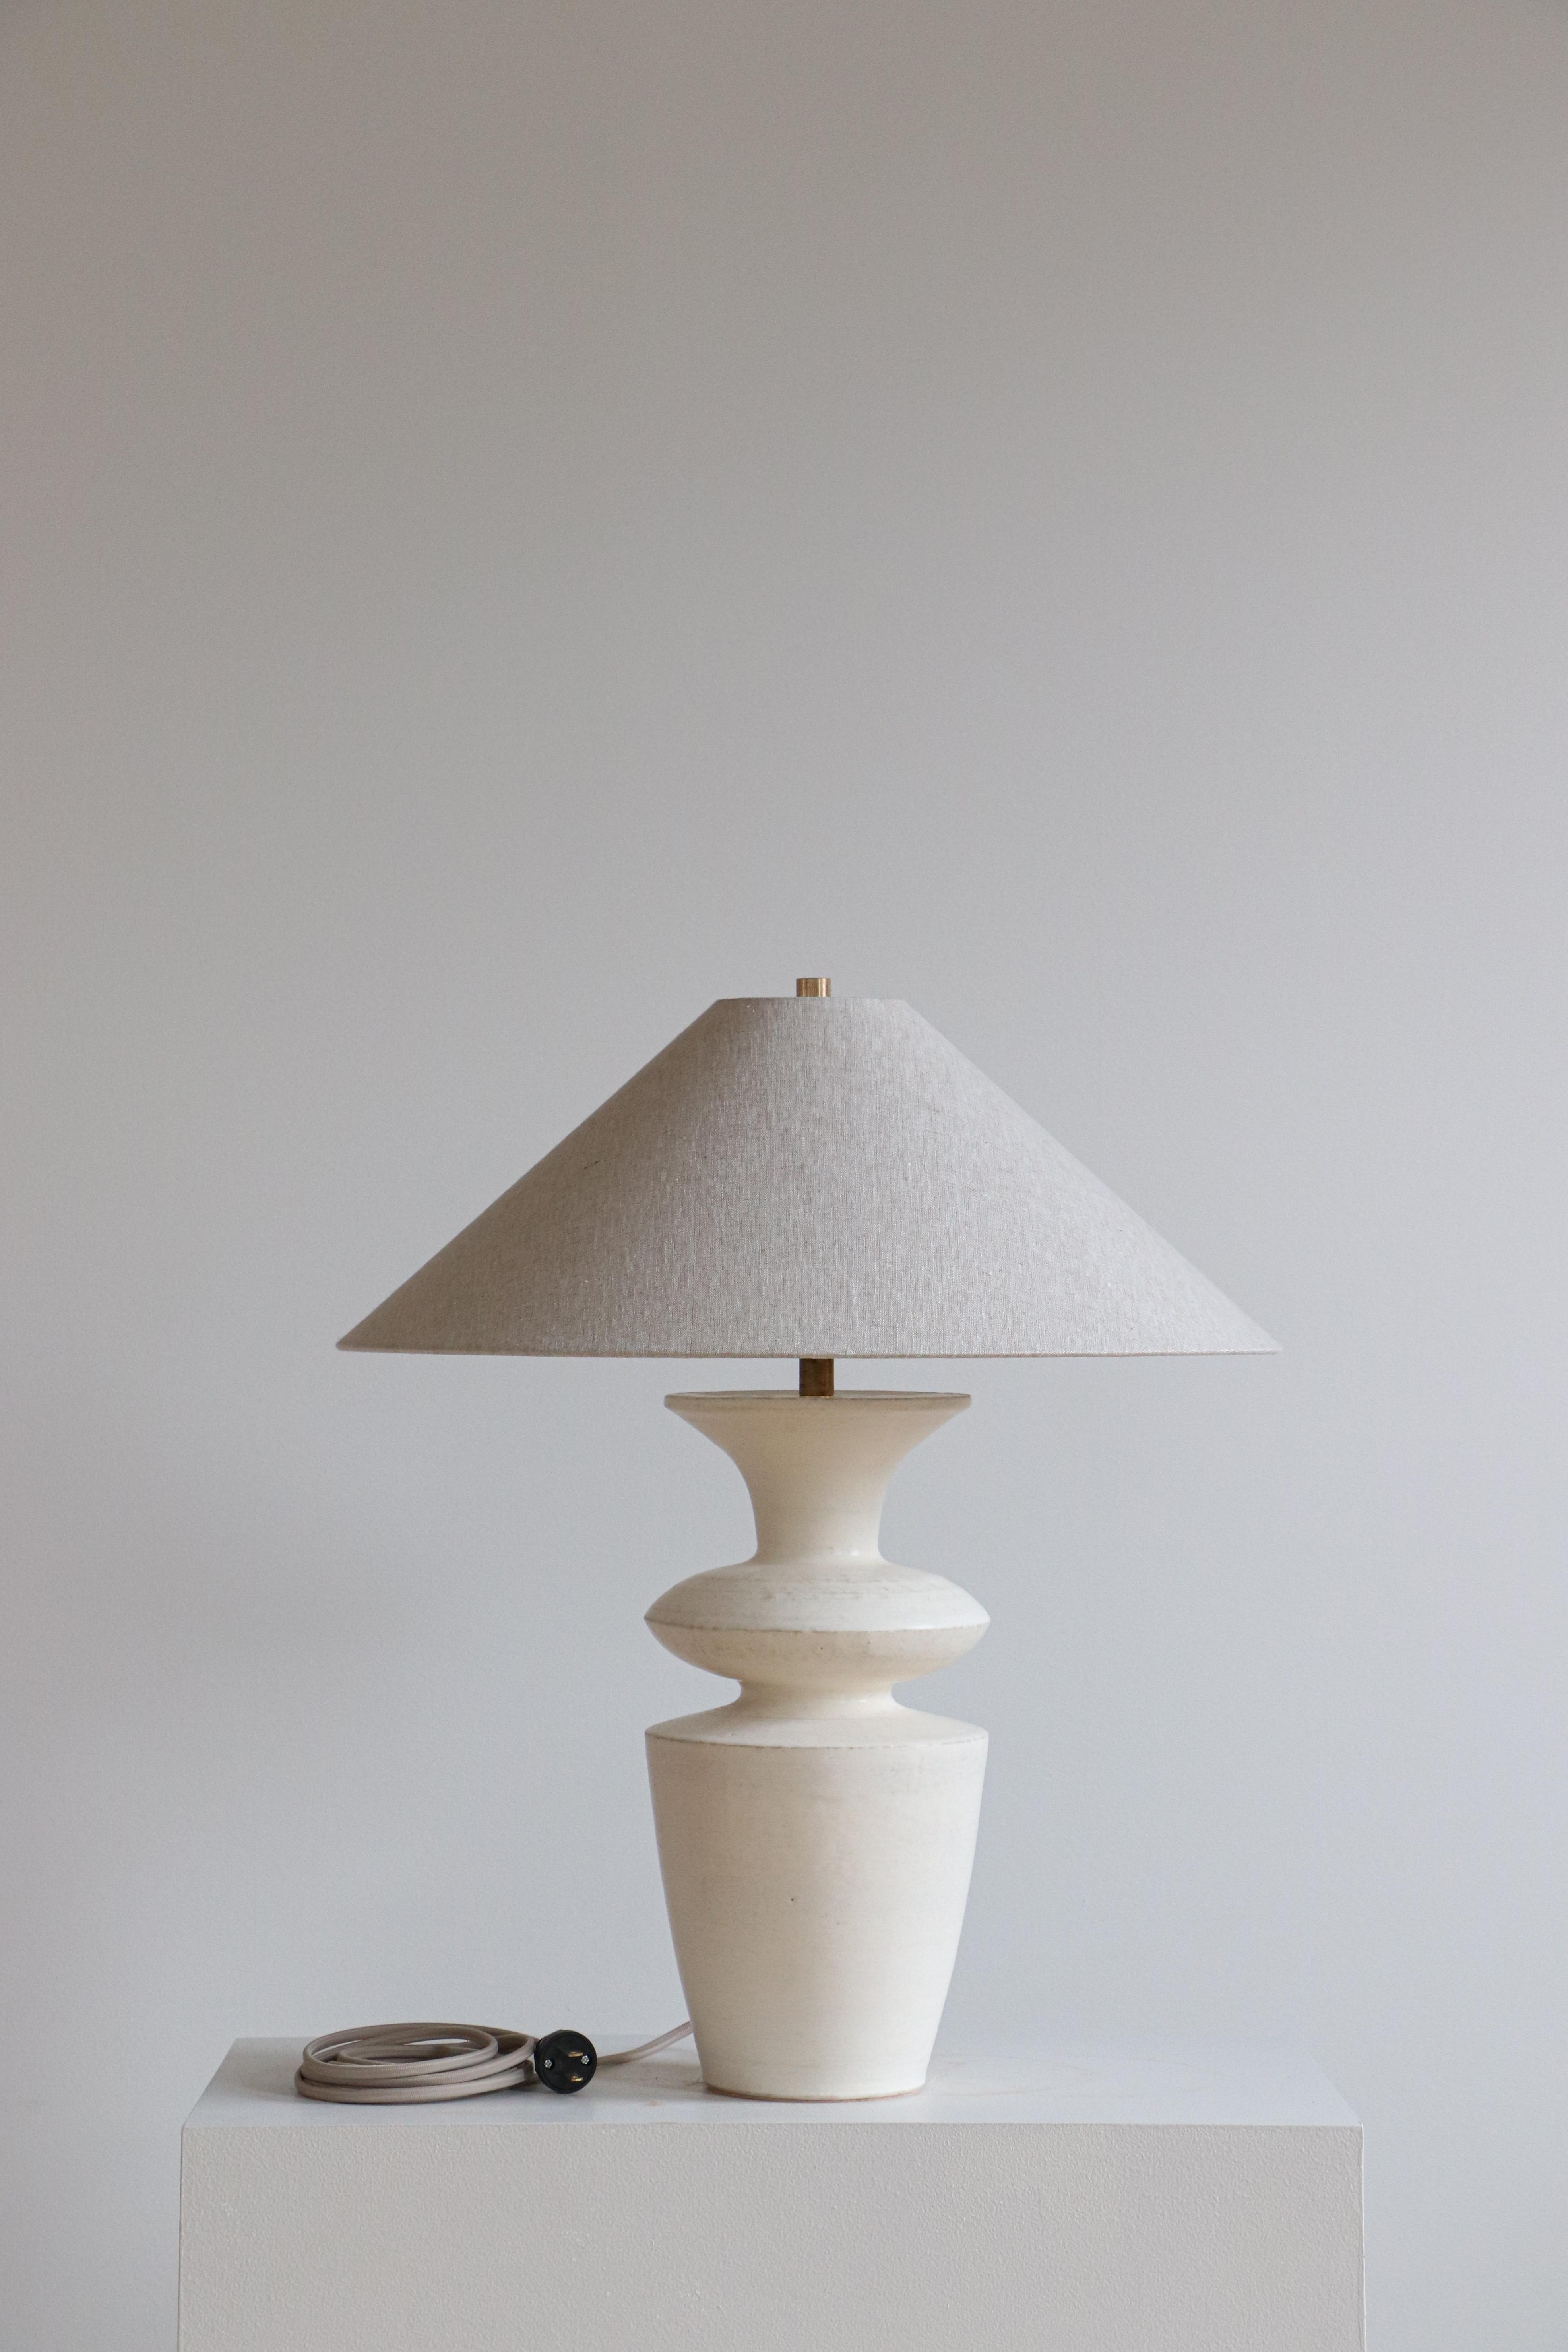 Stone Rhodes Table Lamp by Danny Kaplan Studio
Dimensions: ⌀ 51 x H 69 cm
Materials: Glazed Ceramic, Unfinished Brass, Linen

This item is handmade, and may exhibit variability within the same piece. We do our best to maintain a consistent product,